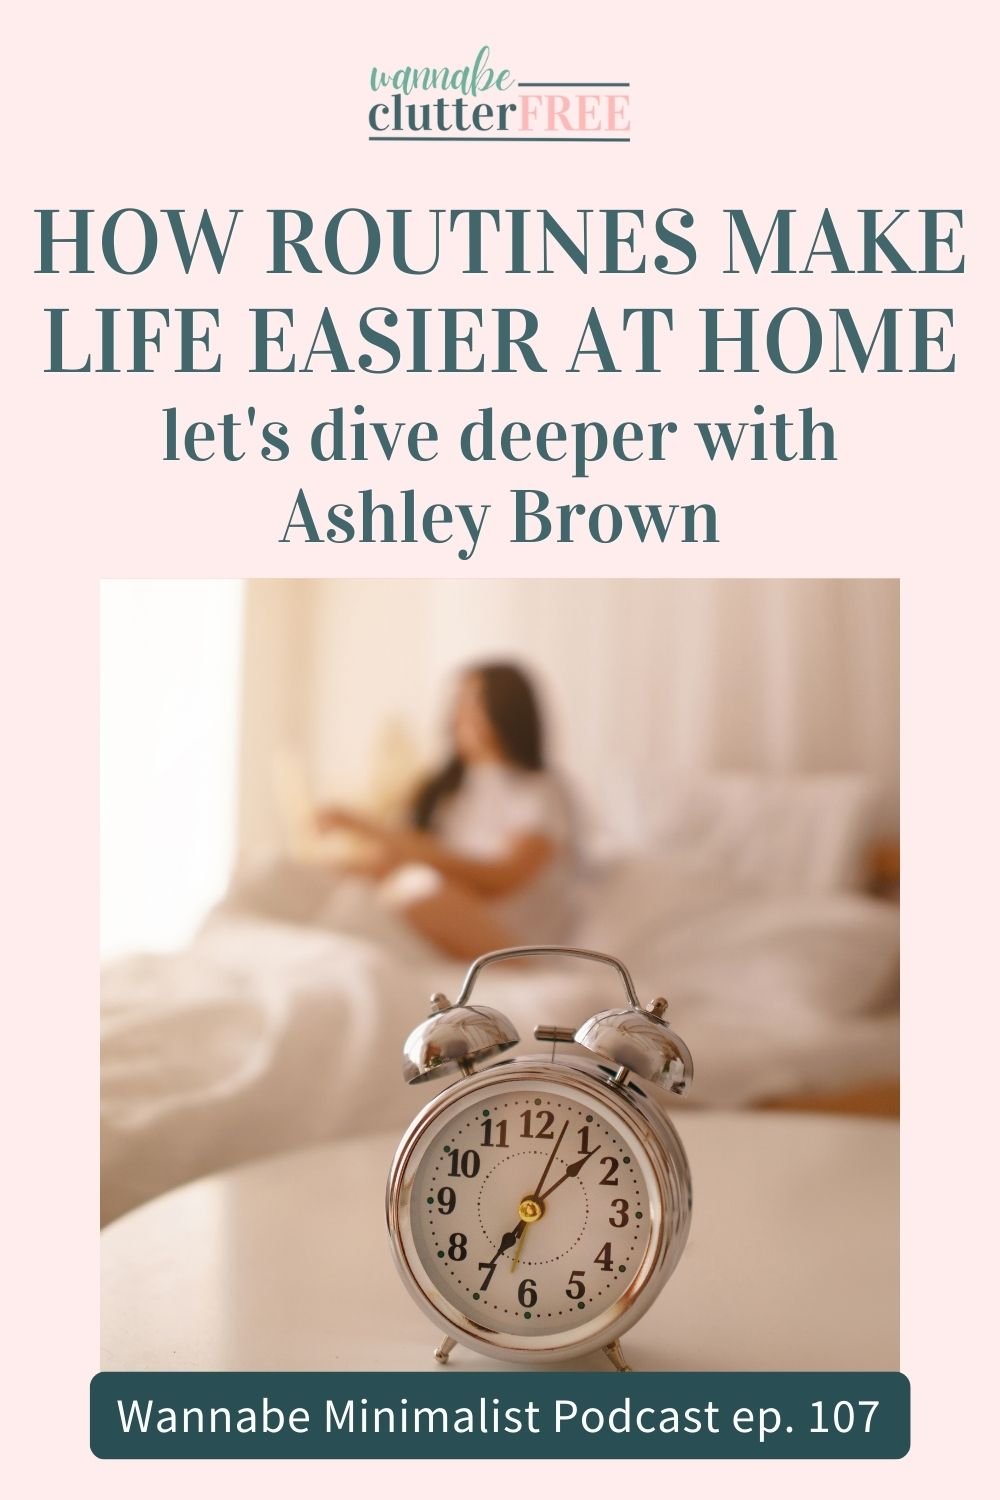 How routines make life easier at home